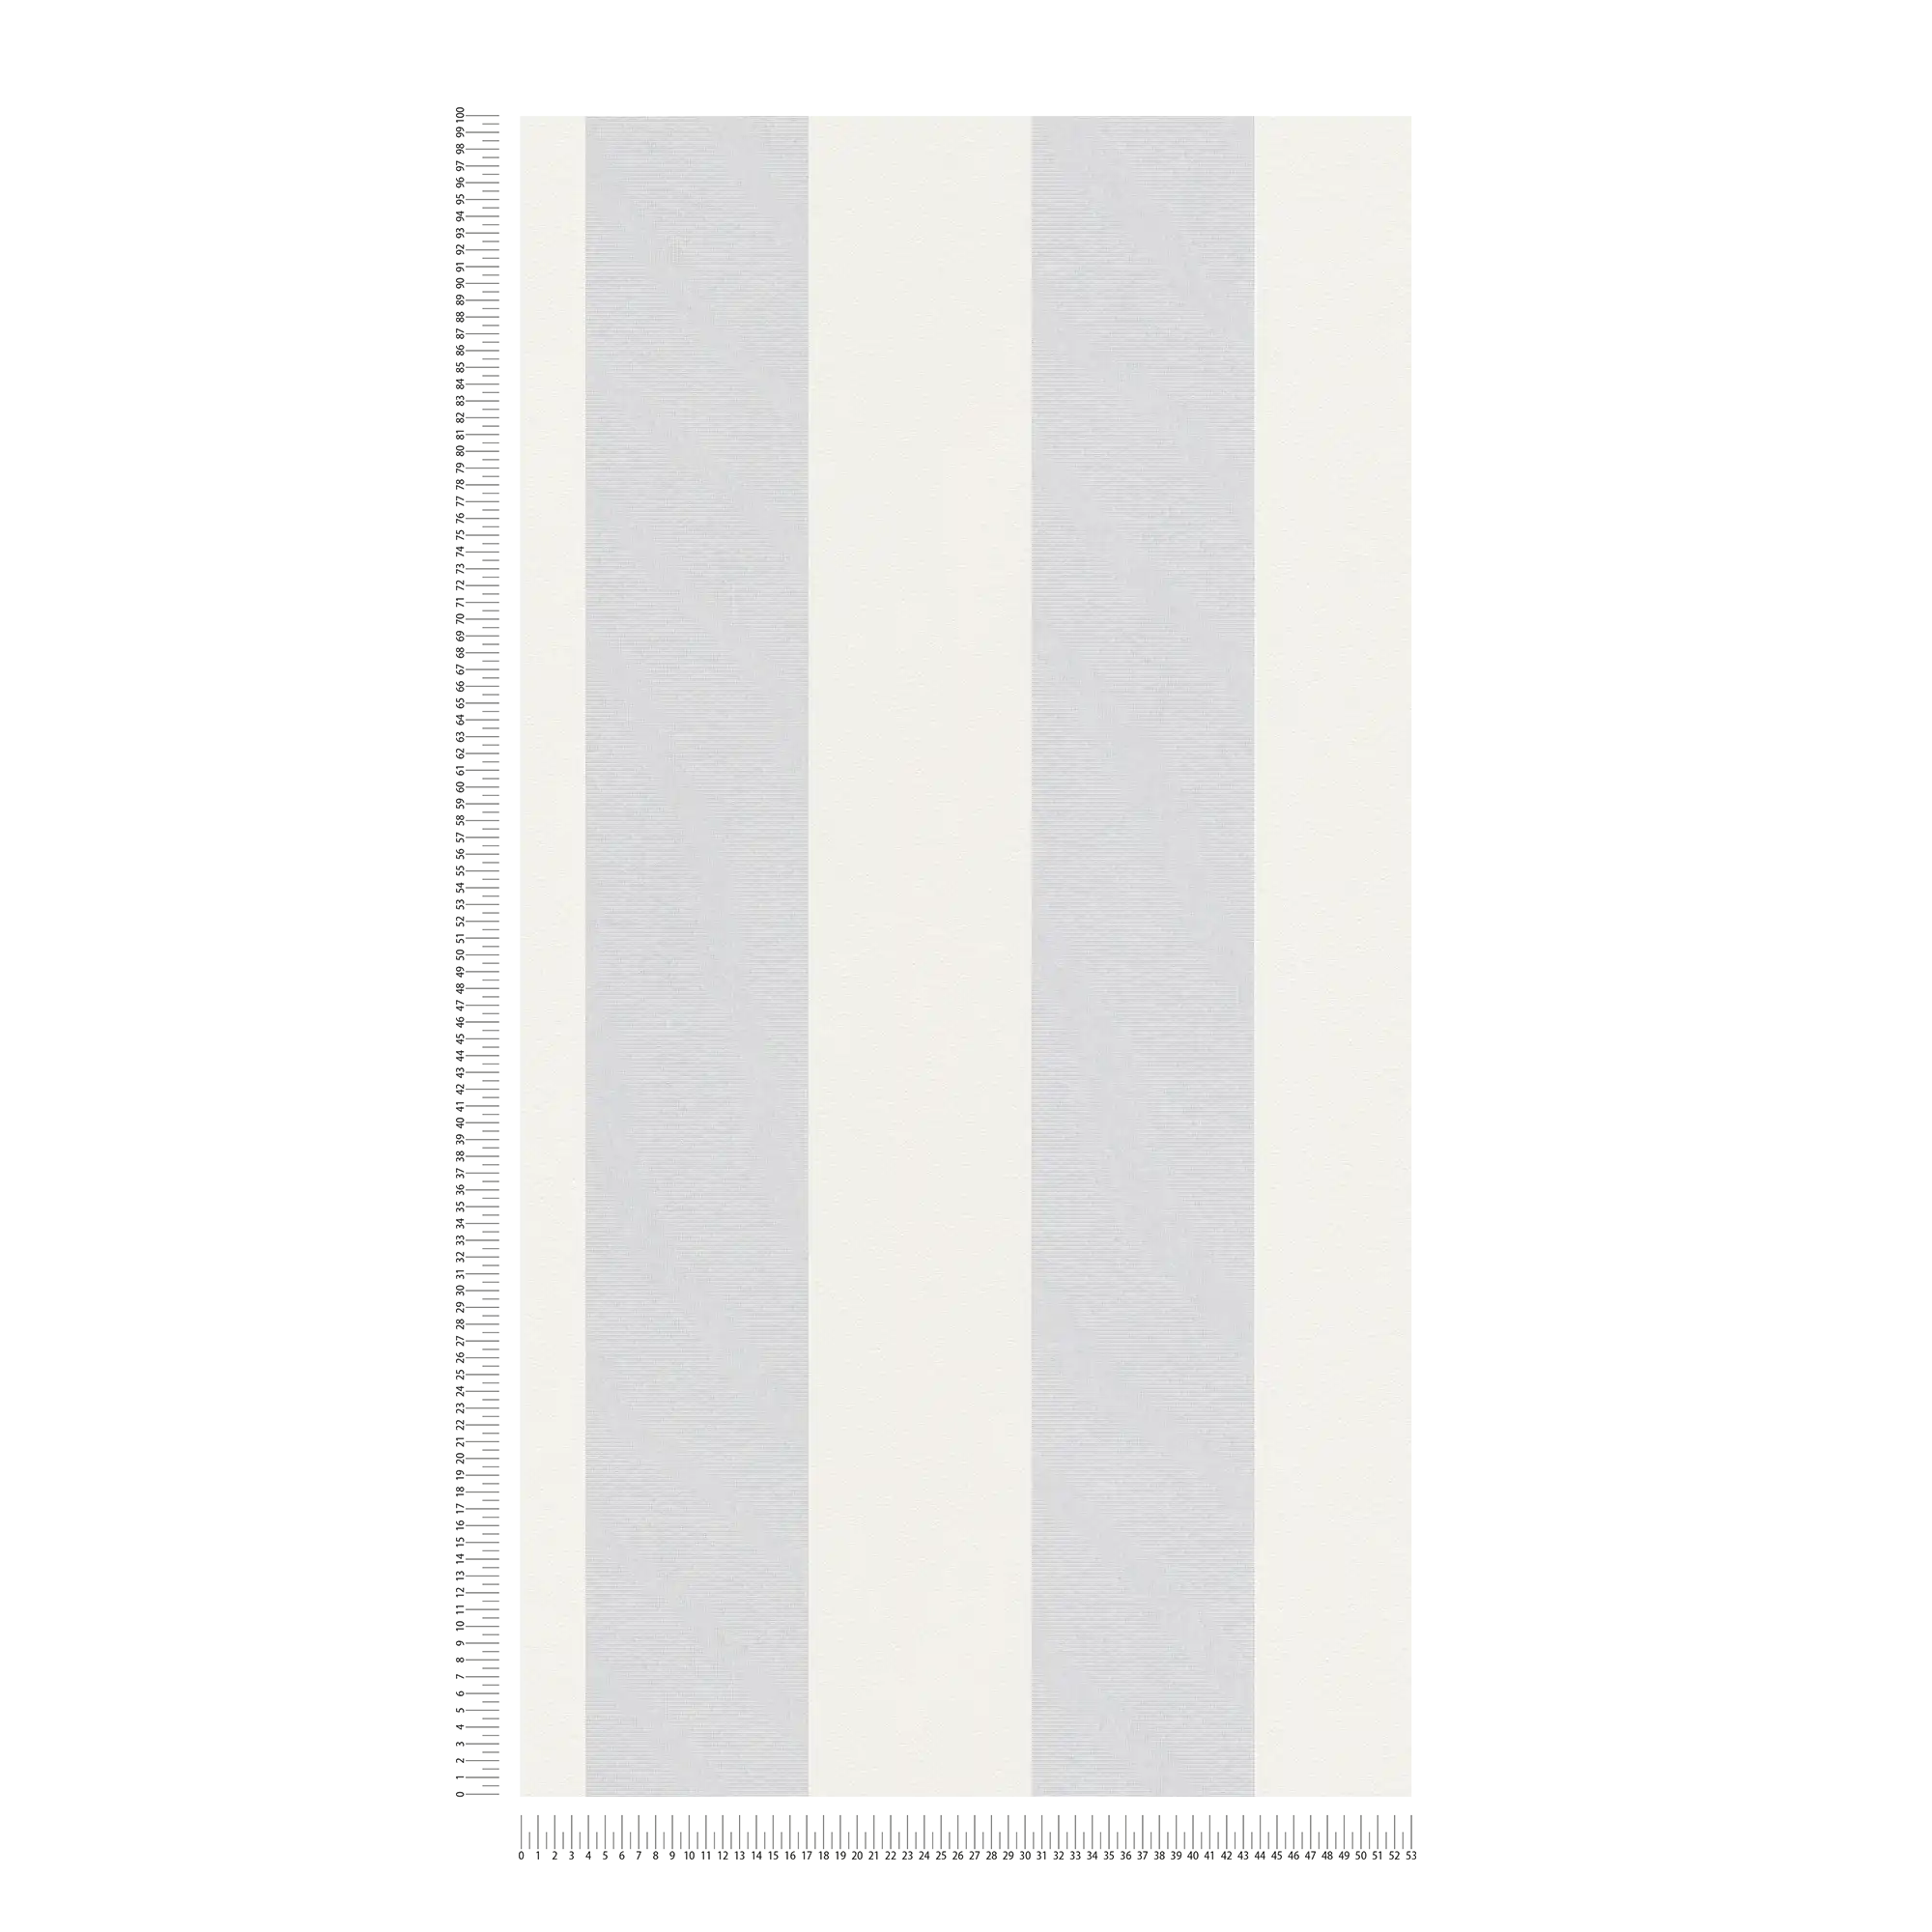             Paintable stripes wallpaper block stripes with 3D look - white
        